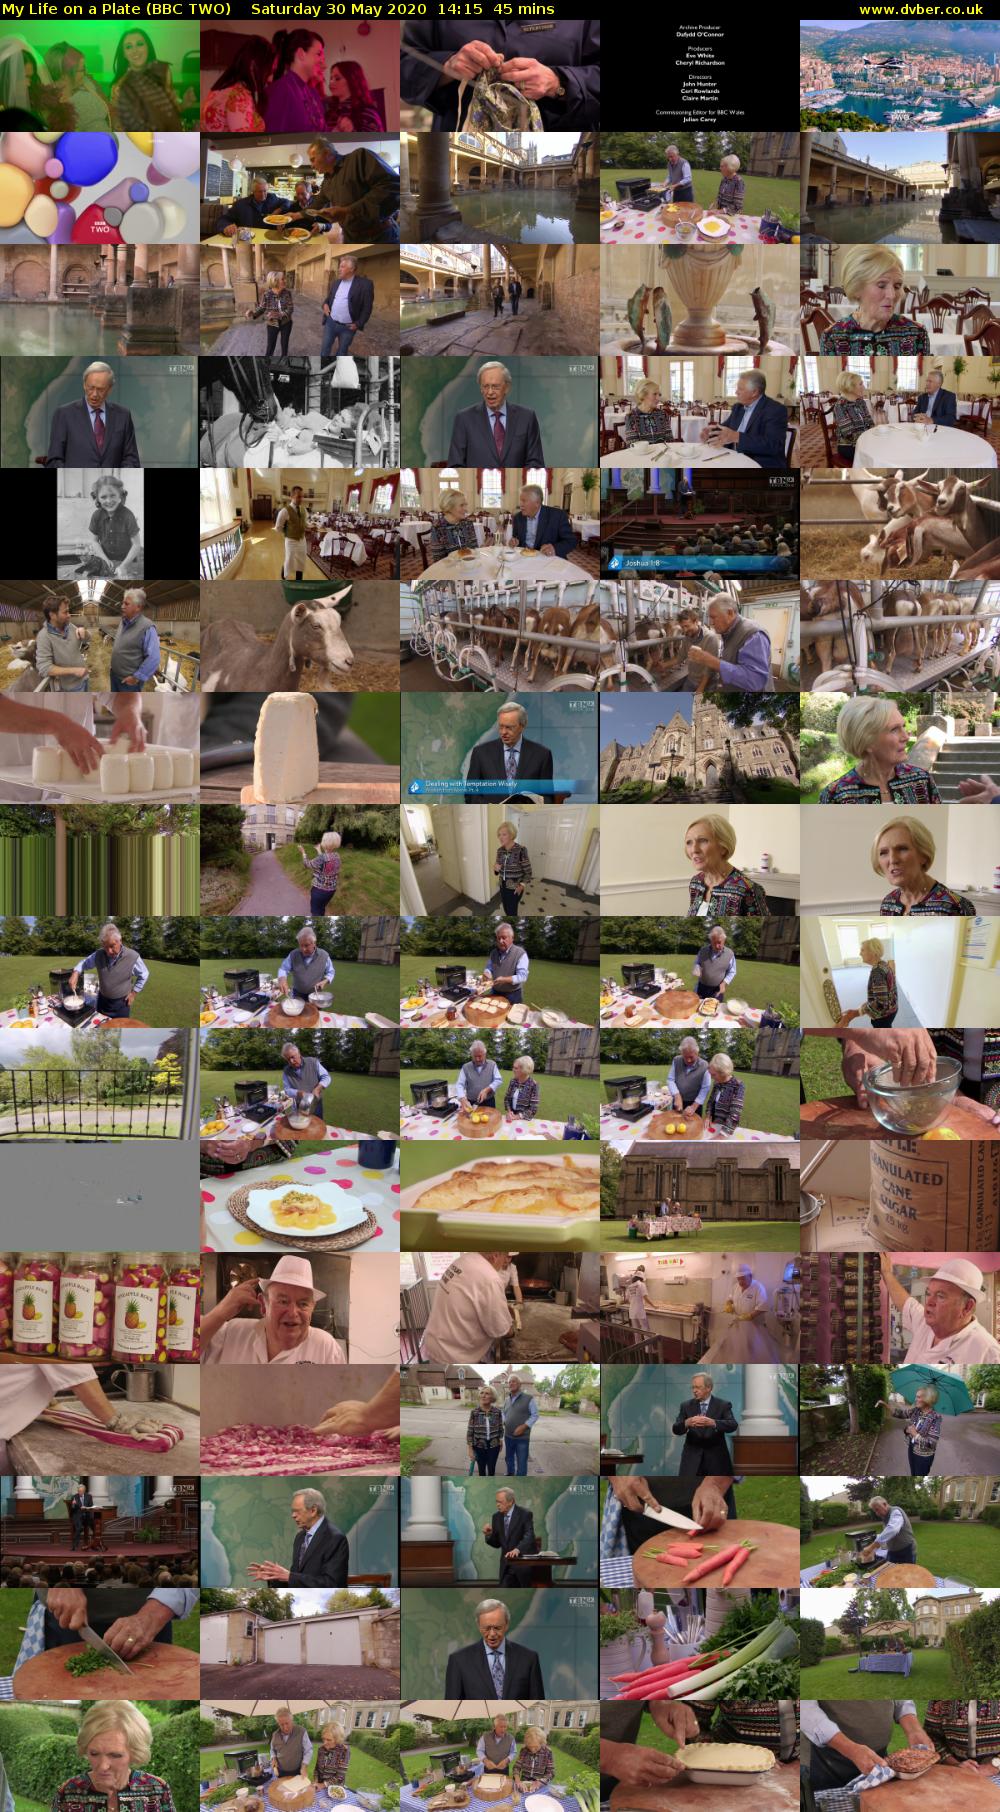 My Life on a Plate (BBC TWO) Saturday 30 May 2020 14:15 - 15:00